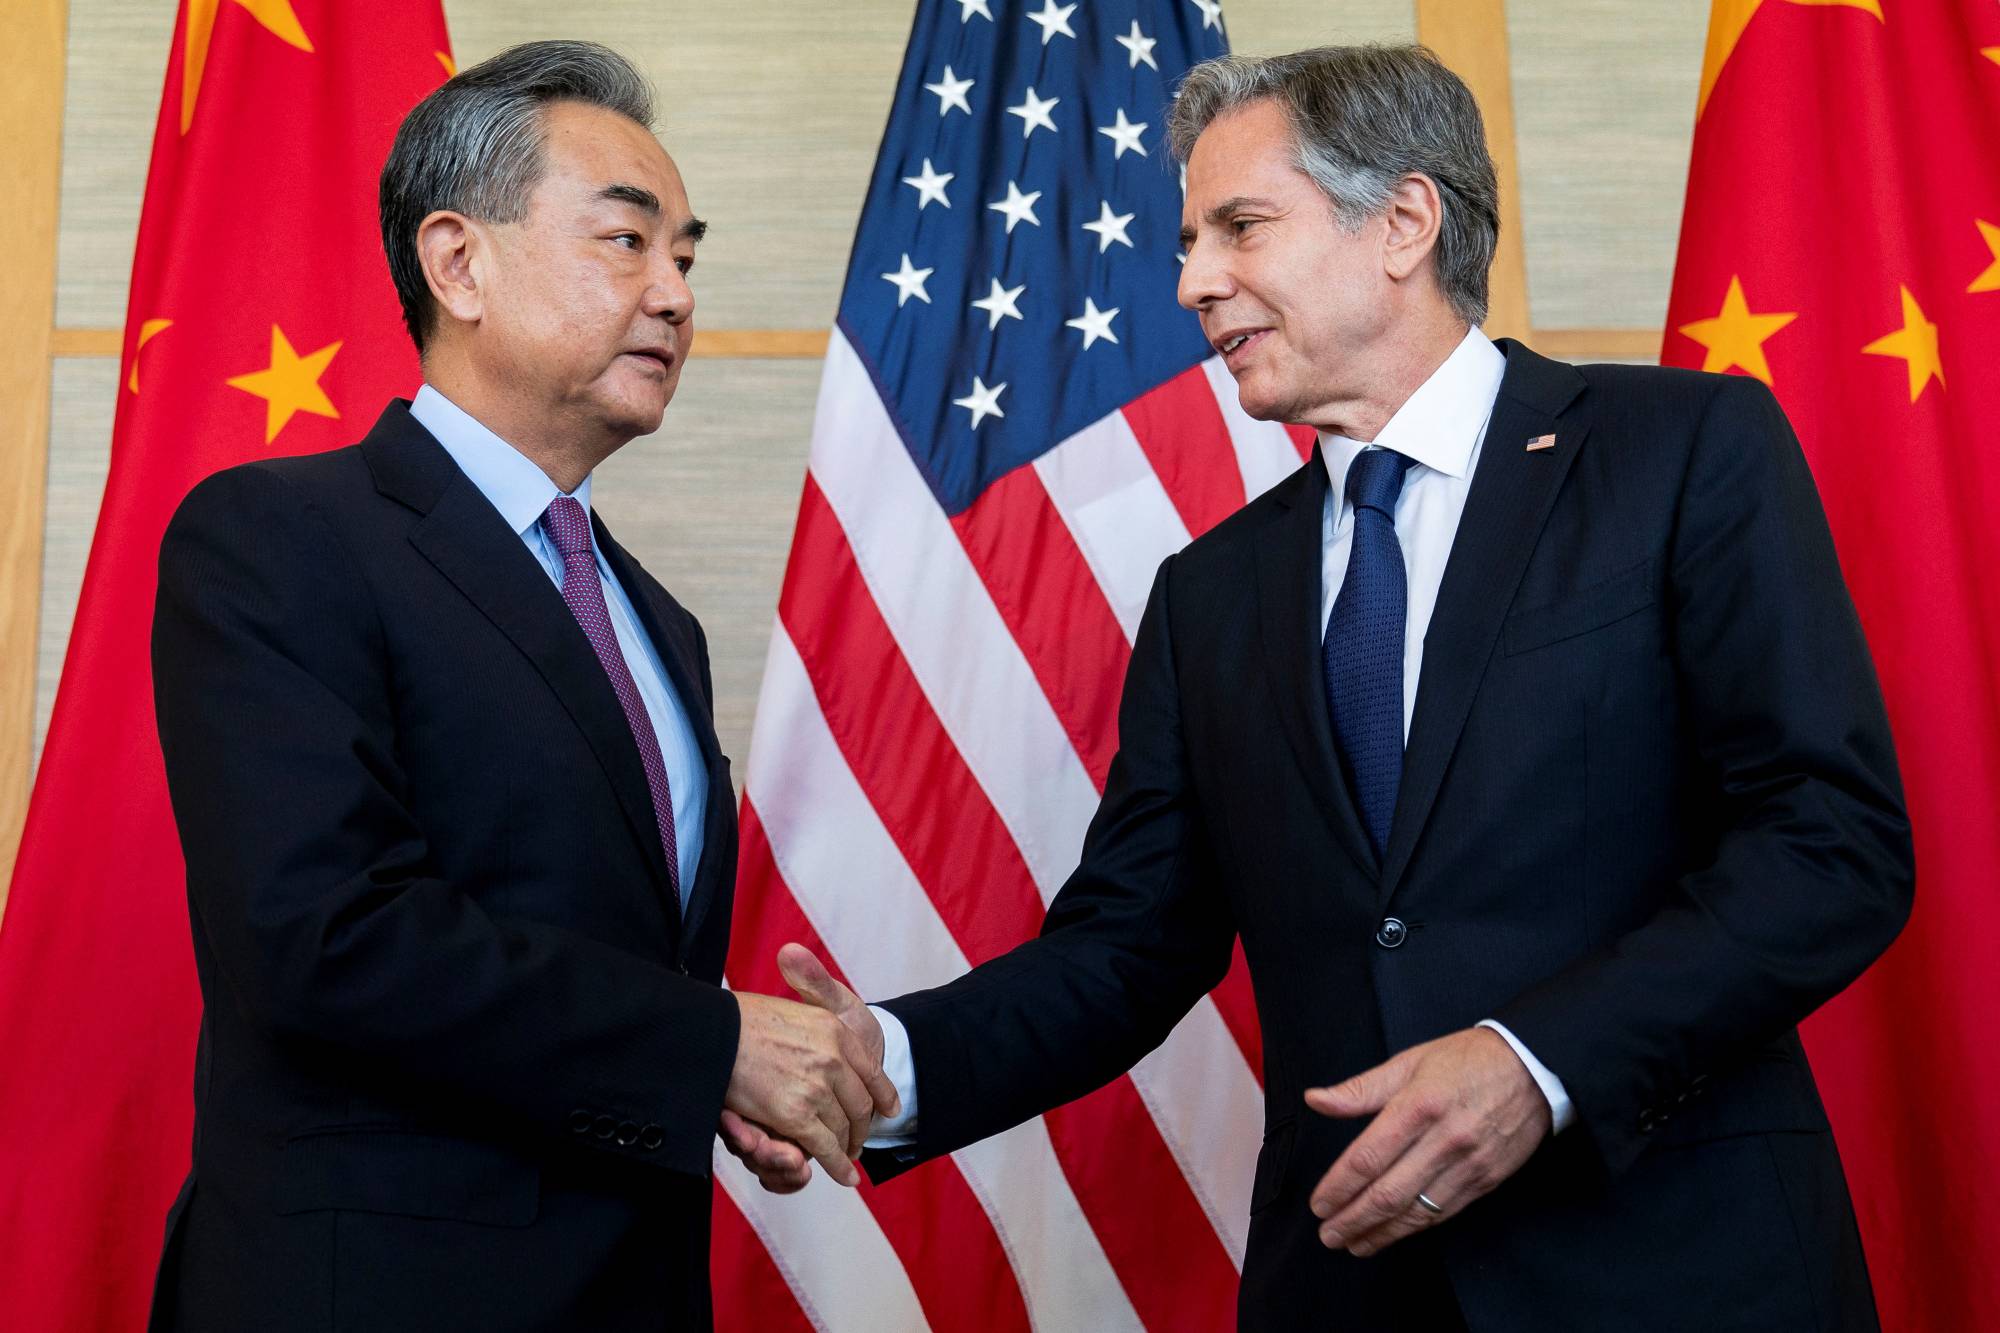 U.S. Secretary of State Antony Blinken meets Chinese Foreign Minister Wang Yi during a meeting in Nusa Dua, Bali, Indonesia, on Saturday. | POOL / VIA REUTERS